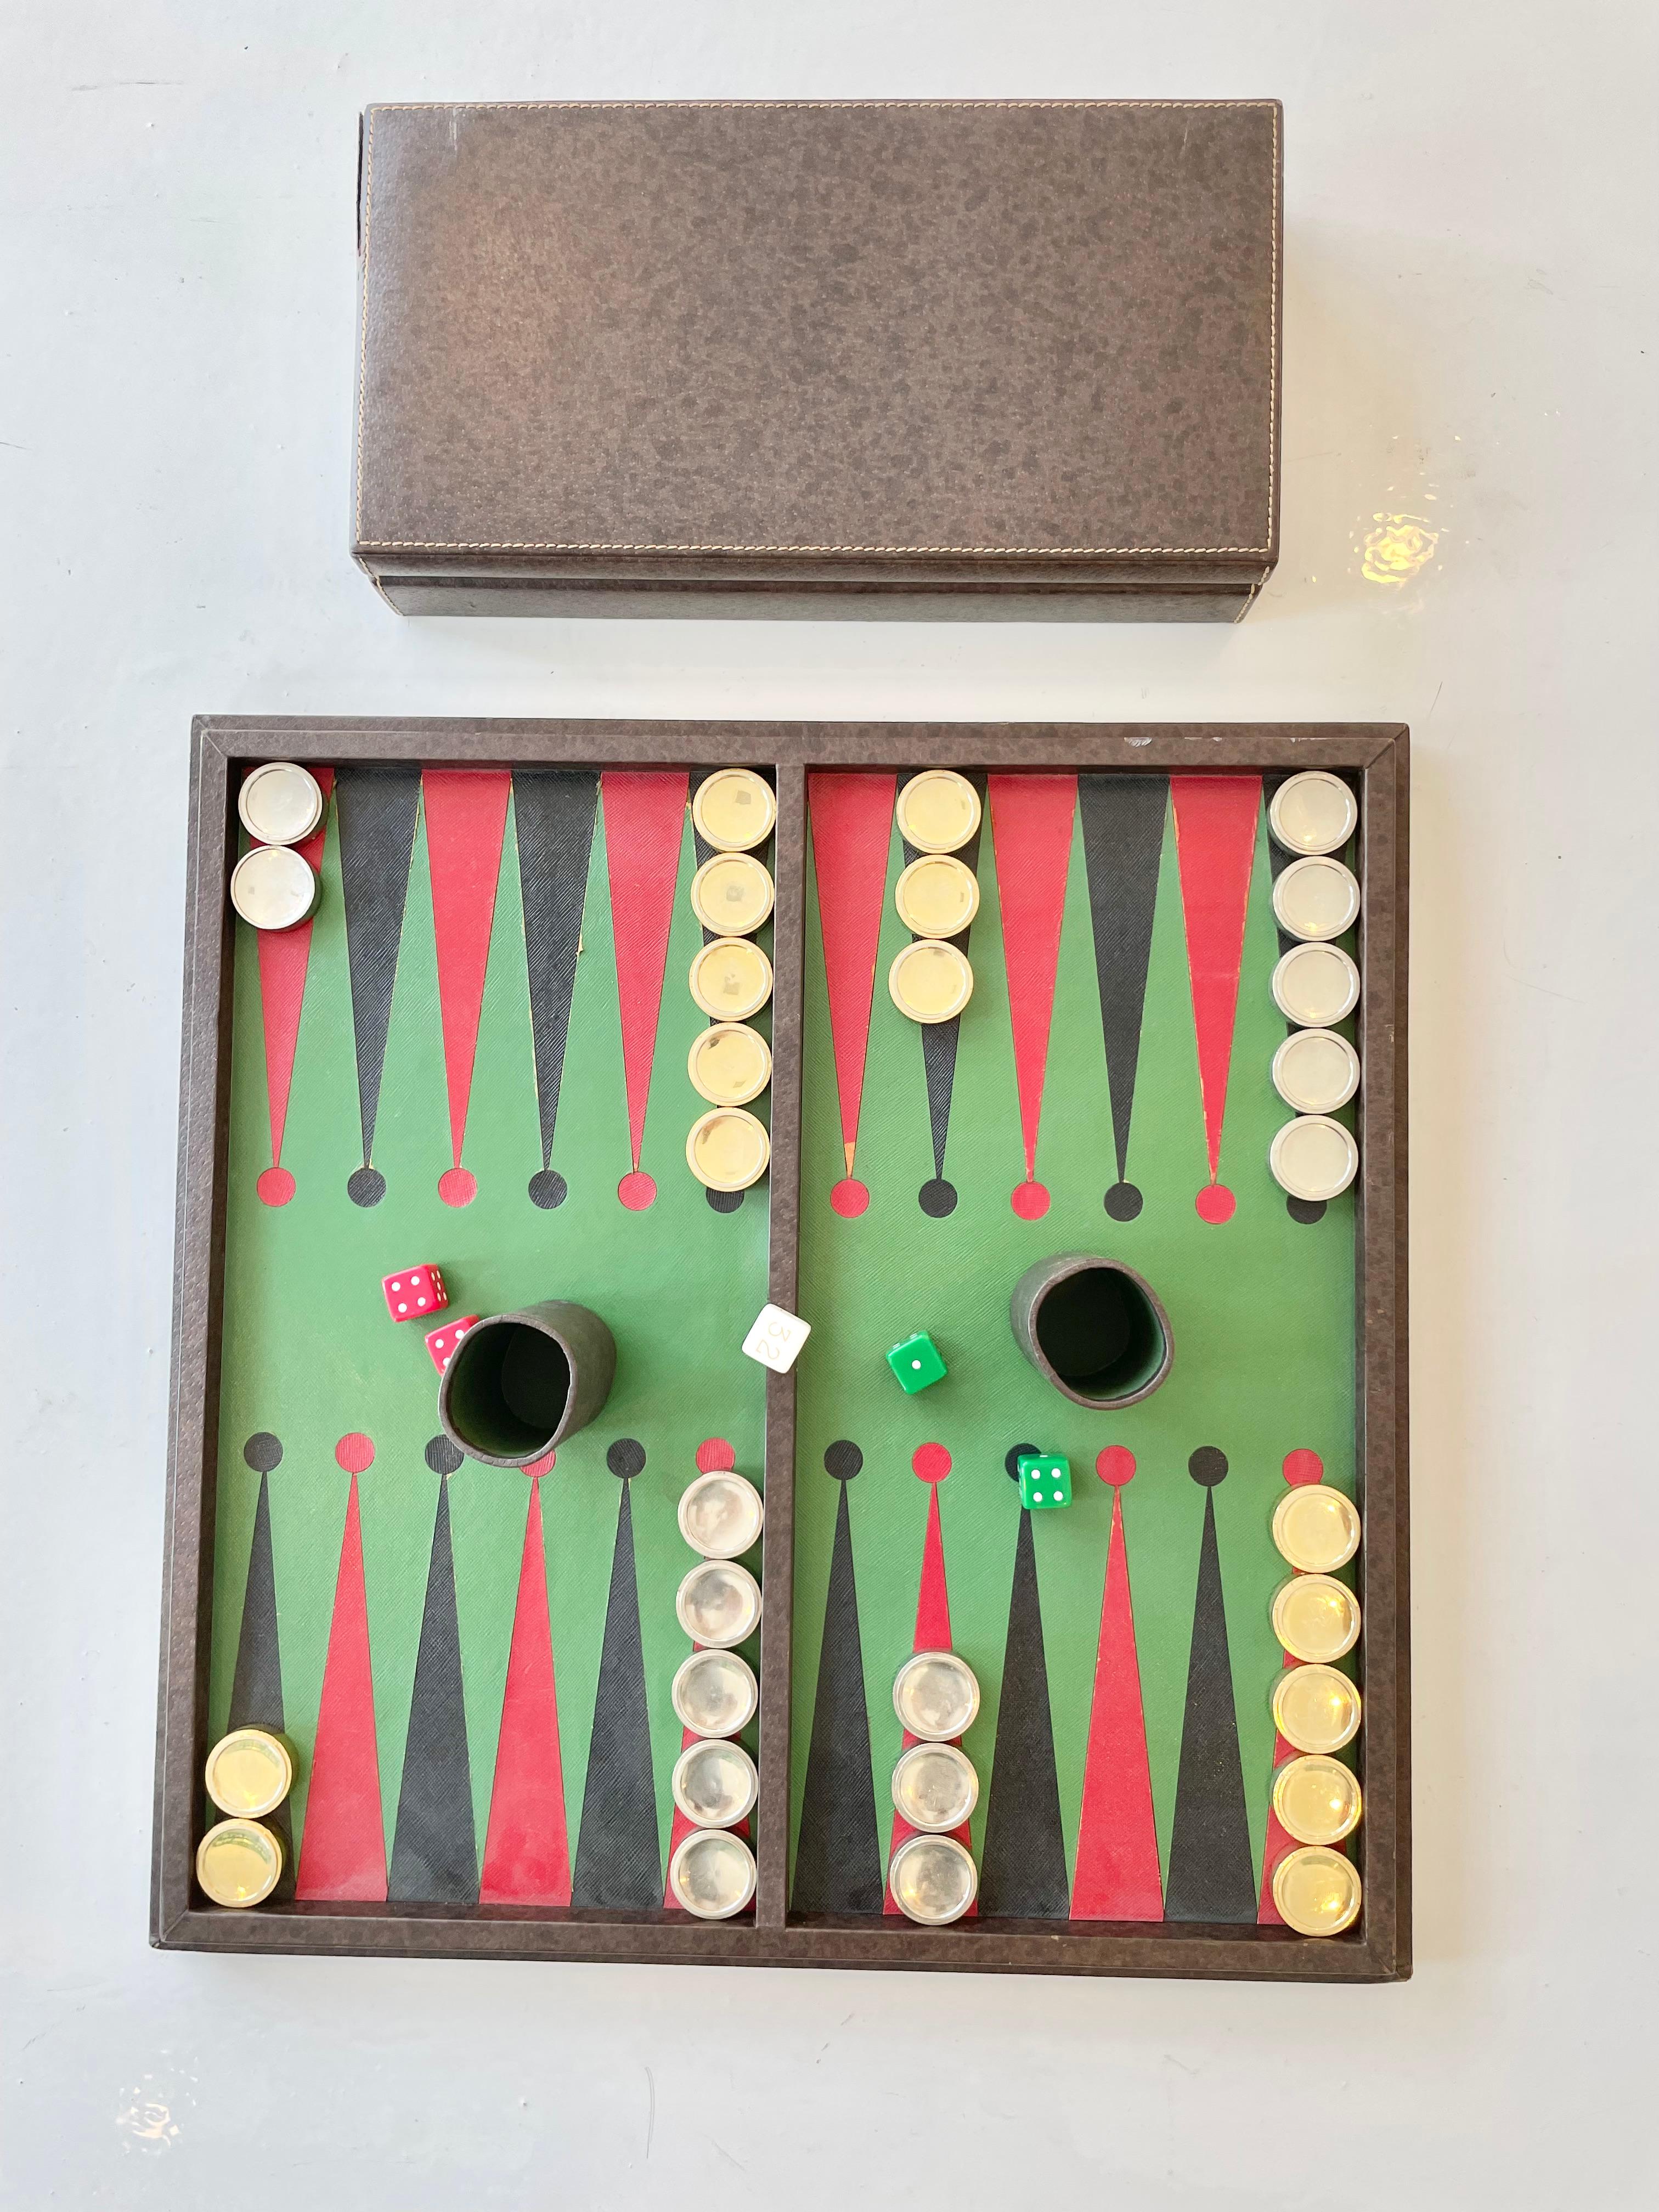 Vintage Gucci game board with backgammon on one side and chess on the other. Sturdy wood framed board wrapped in brown burnished leather with contrast stitching. Traditional green and red Gucci color palette on both game boards with heavy brass and